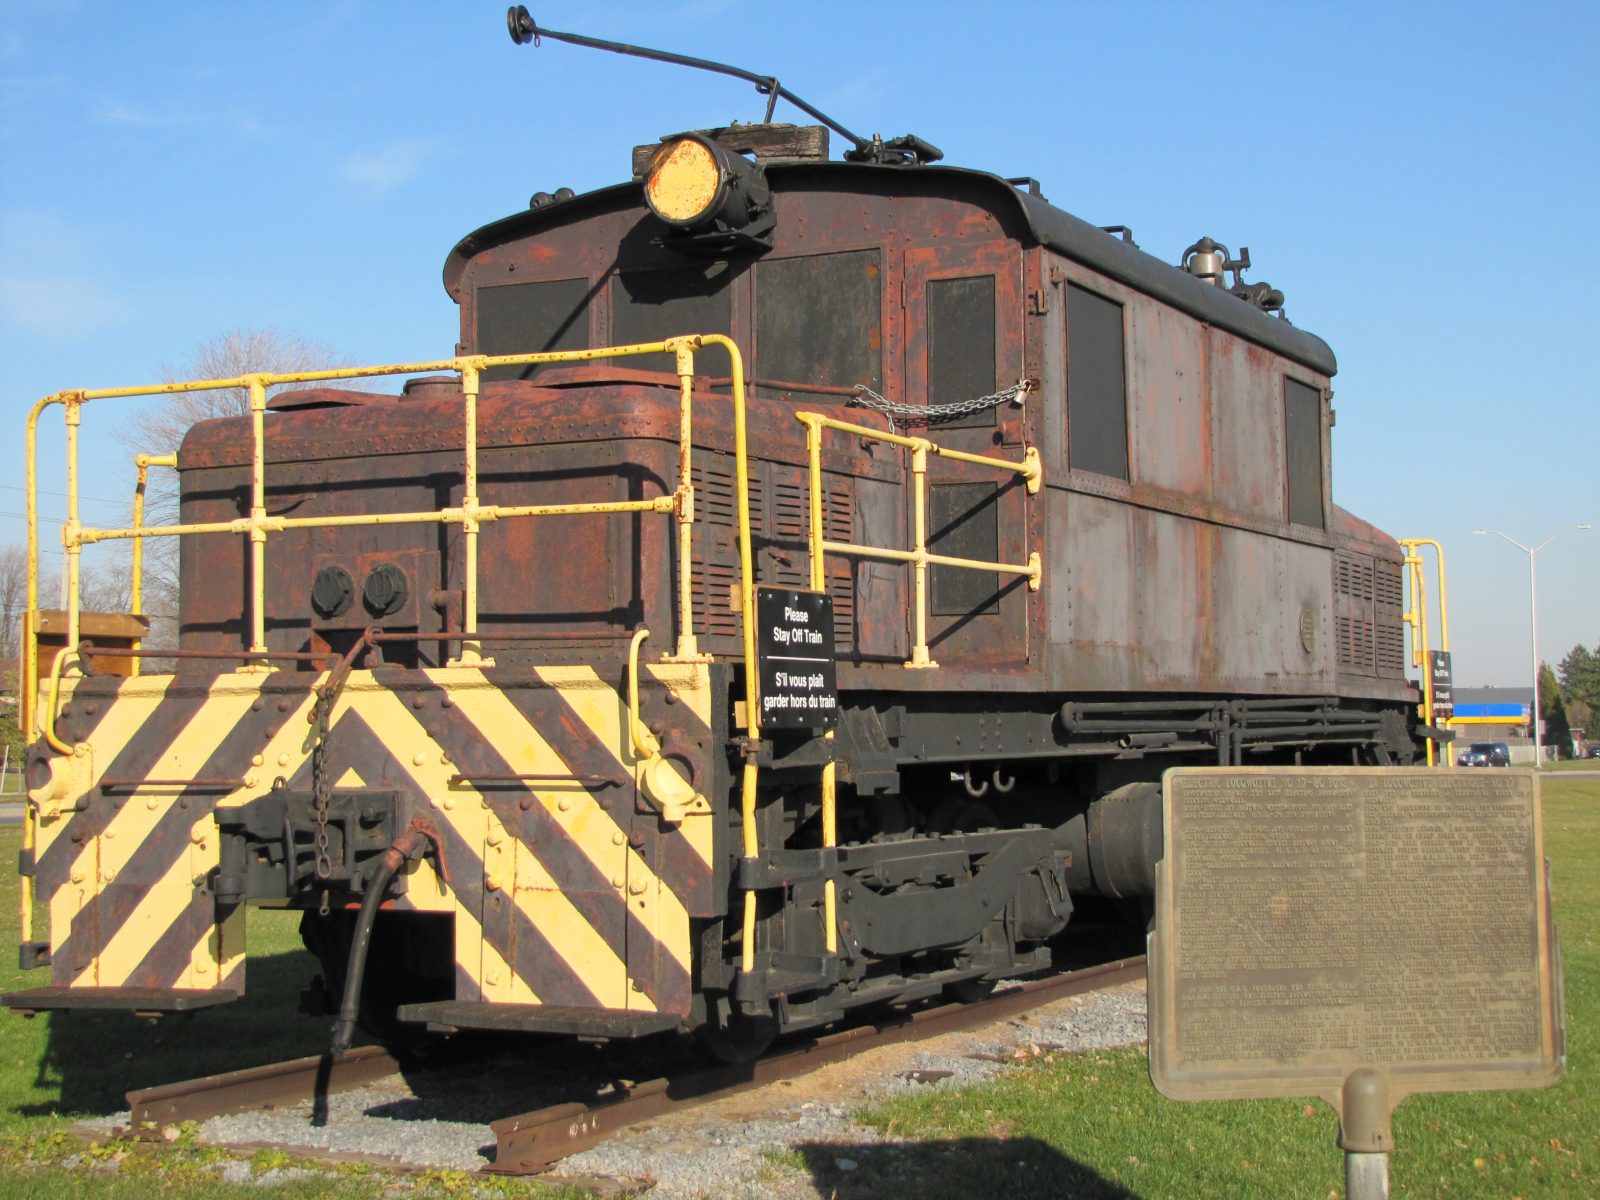 LETTER TO THE EDITOR: Objection to repeal of Locomotive #17’s heritage status